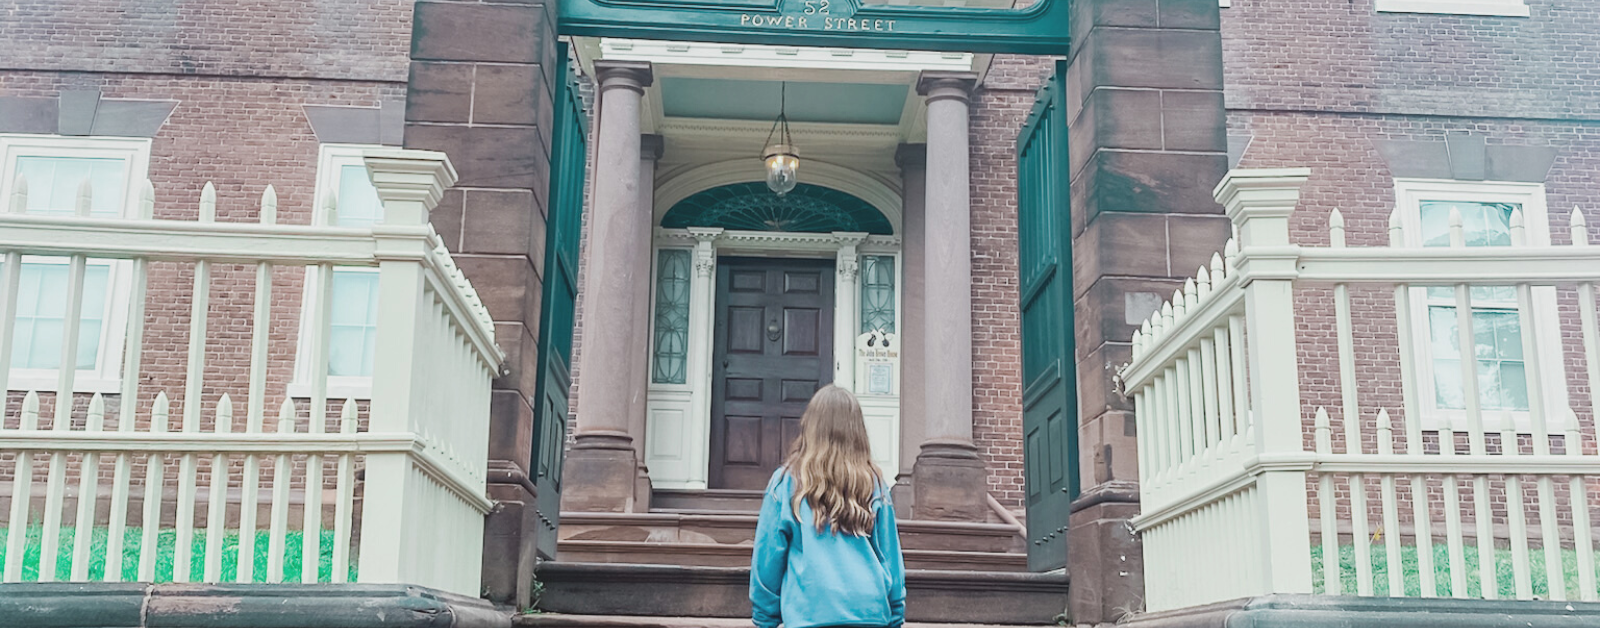 Marilee stands in front of the red brick John Brown home